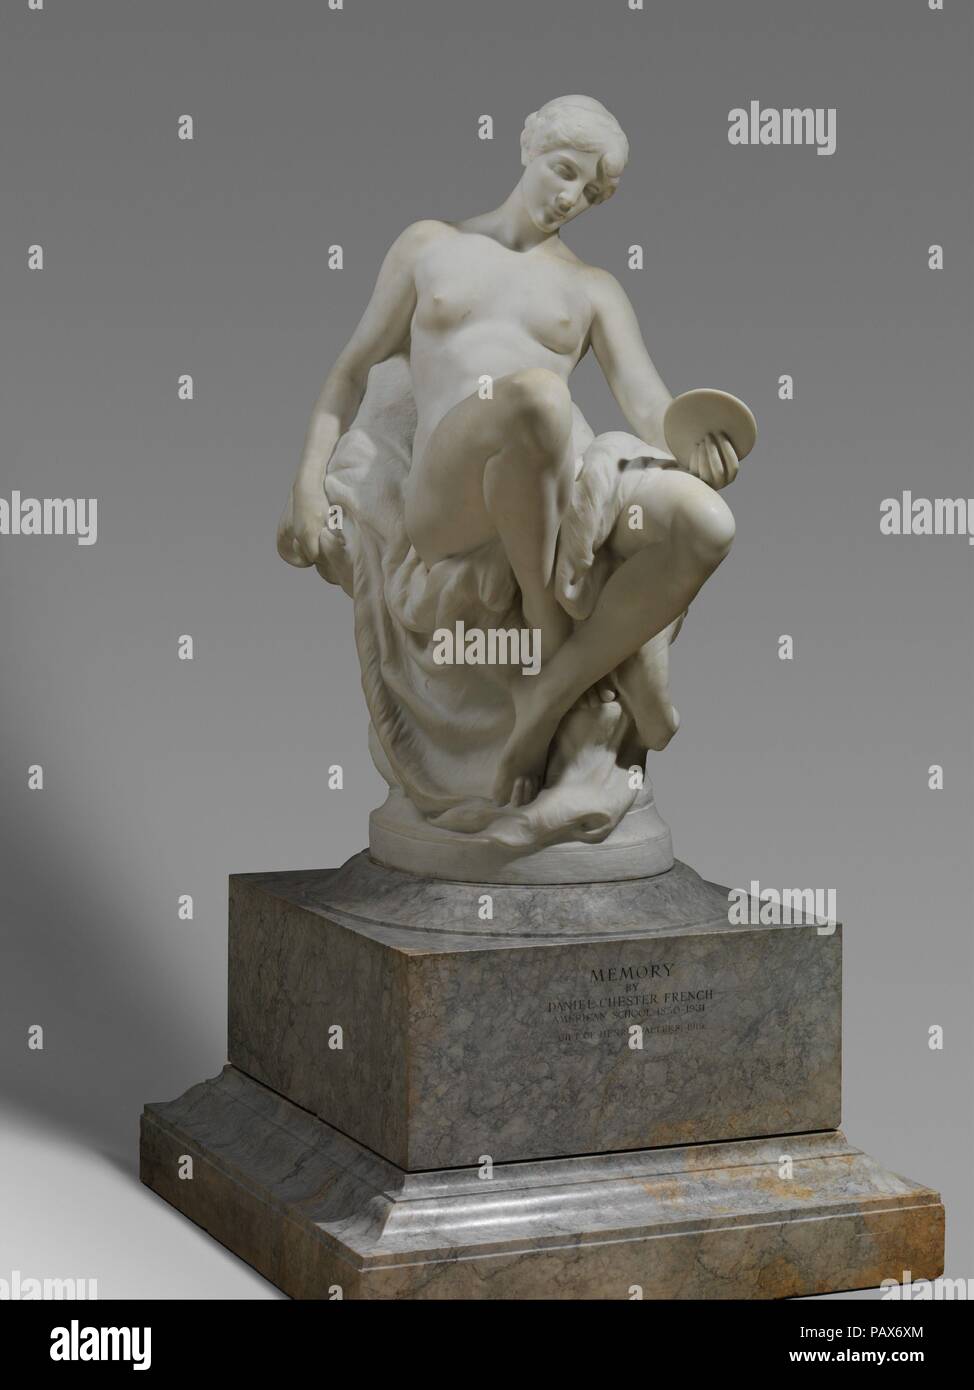 Memory. Artist: Daniel Chester French (American, Exeter, New Hampshire 1850-1931 Stockbridge, Massachusetts). Dimensions: 57 1/2 x 25 x 42 1/2 in. (146.1 x 63.5 x 108 cm). Date: 1886-87, revised 1909; carved 1917-19.  For nearly fifty years, French included the allegorical female form in both his private and his public commissions. His involvement with Memory spanned over three decades, from his initial clay sketch of 1886 to the exhibition of this enlarged marble in 1919. The sculptor focused on conveying life's transience through symbolism: the motif of the mirror as well as the work's title Stock Photo